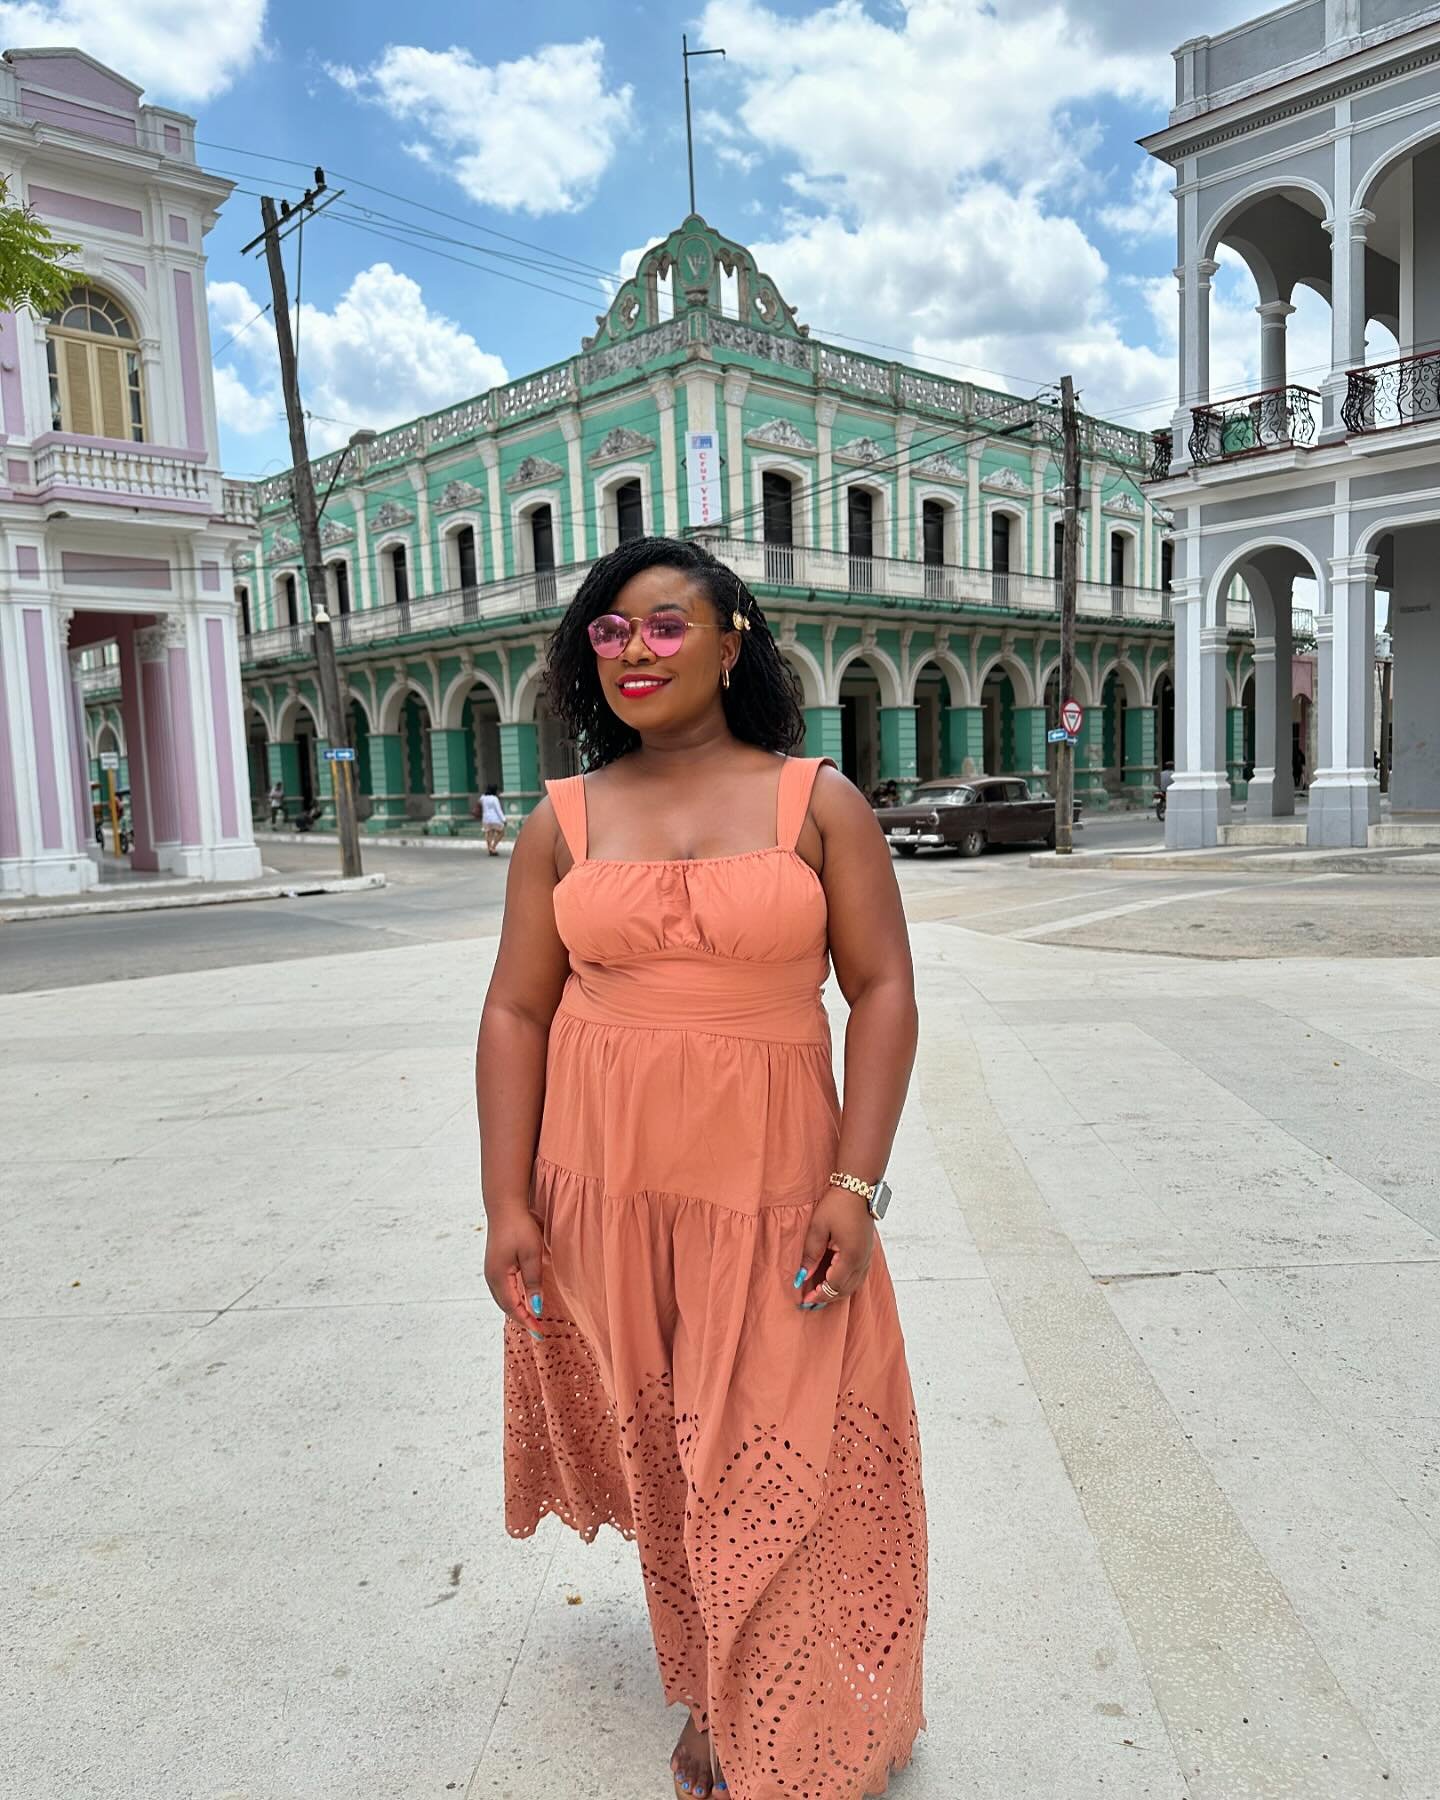 Postcards from my mini sabbatical to Cuba.

Part of my B.E.S.T life is to take long breaks or mini retirement (1-3 months) from work during the year instead of waiting for an official retirement date.

What&rsquo;s ironic is that I quit my full time 